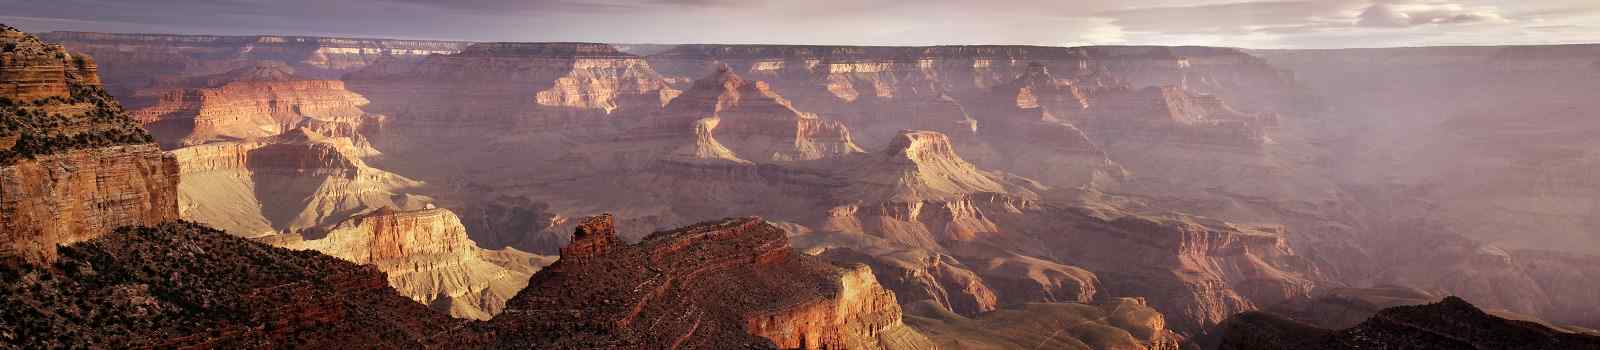 AMERICAN-DISCOVERY  NP Grand Canyon Panorama 149712287